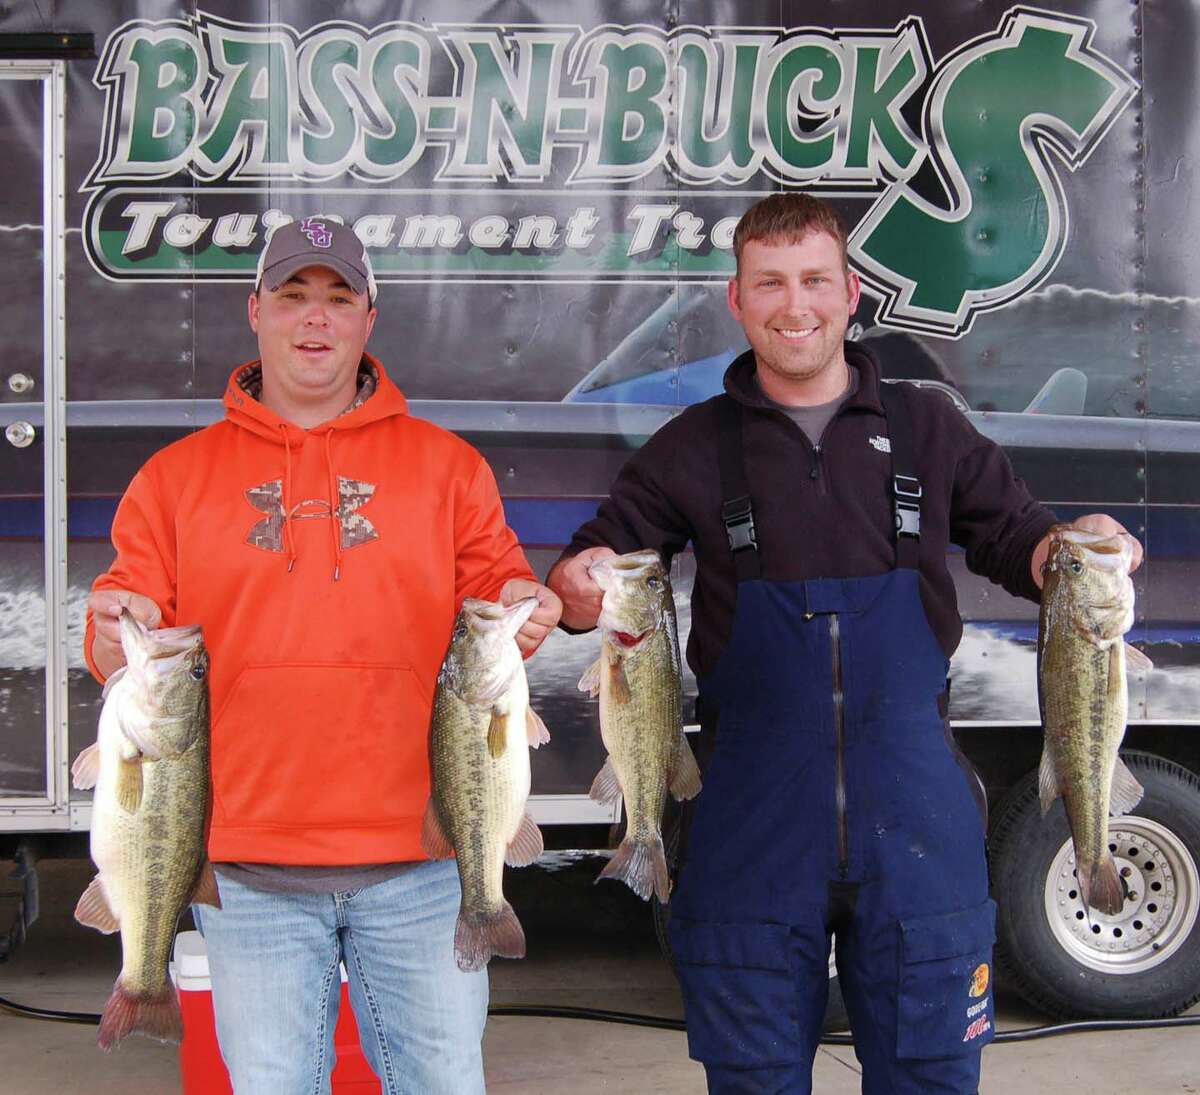 Derrick Strother & Bronk McDaniel had 23.03 lbs to win 3rd place overall for a nice payday Photo by Patty Lenderman, Lakecaster